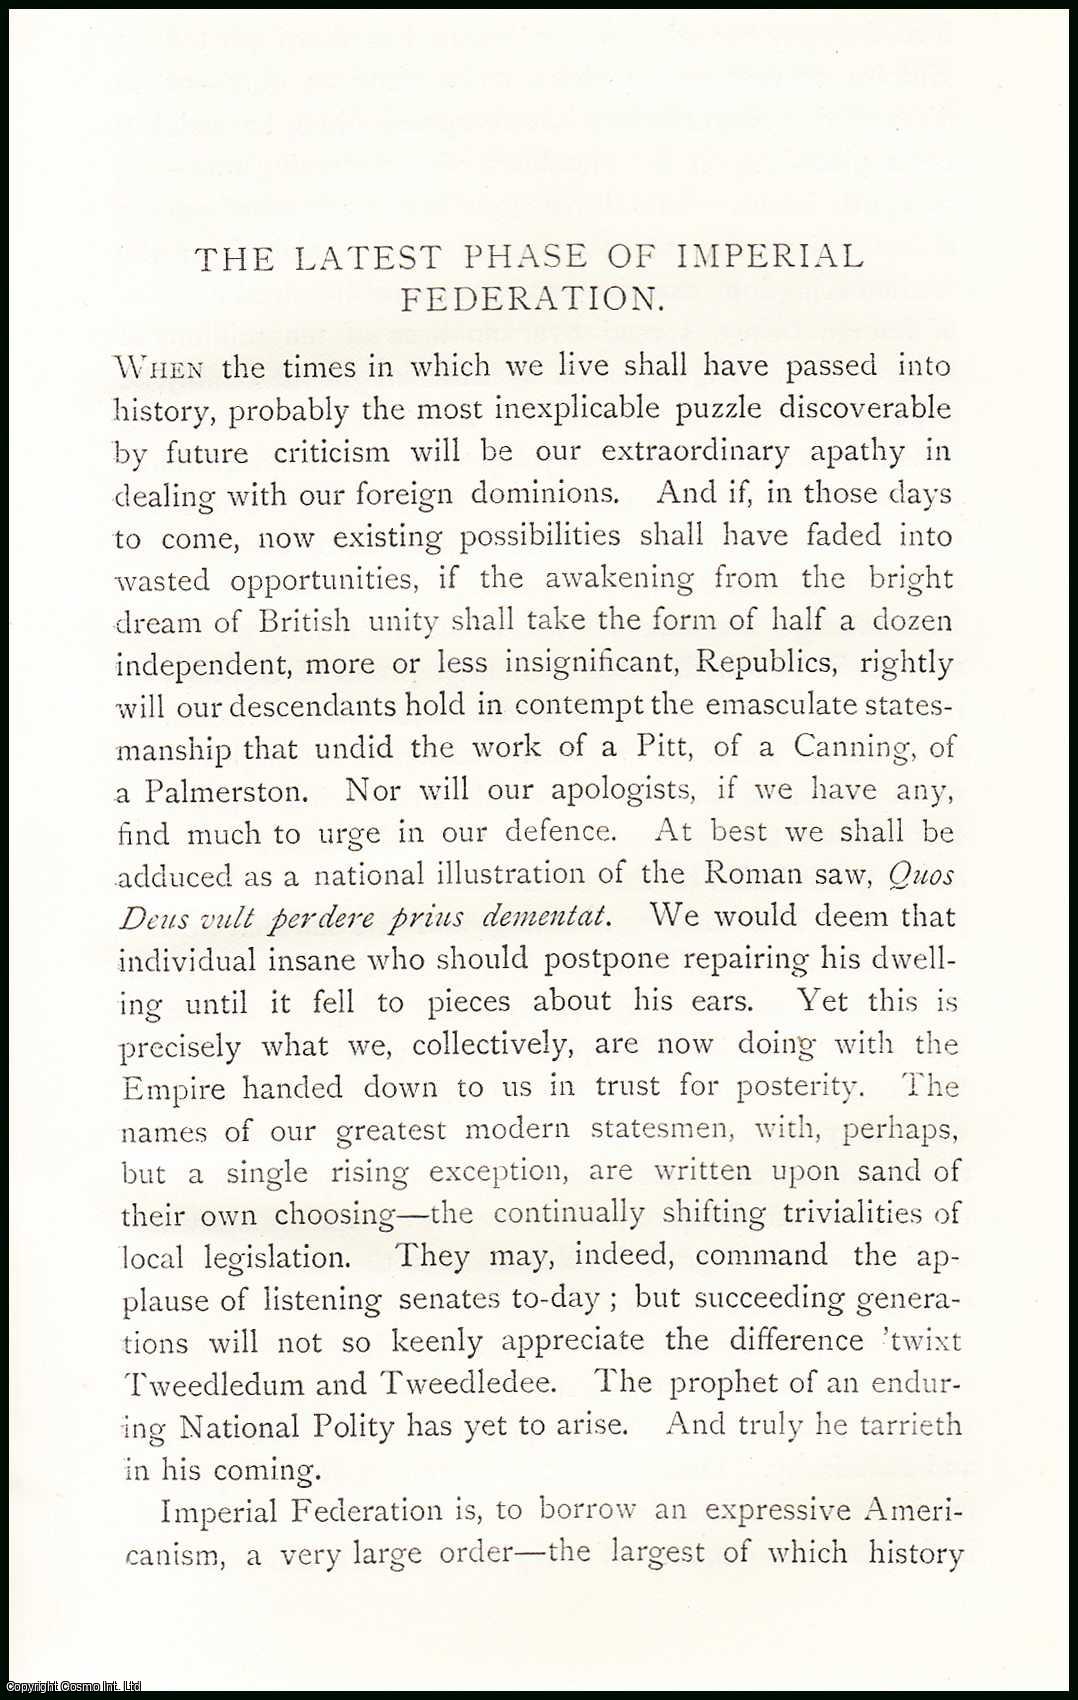 M.H.H. - The Latest Phase of Imperial Federation. An uncommon original article from The Asiatic Quarterly Review, 1891.